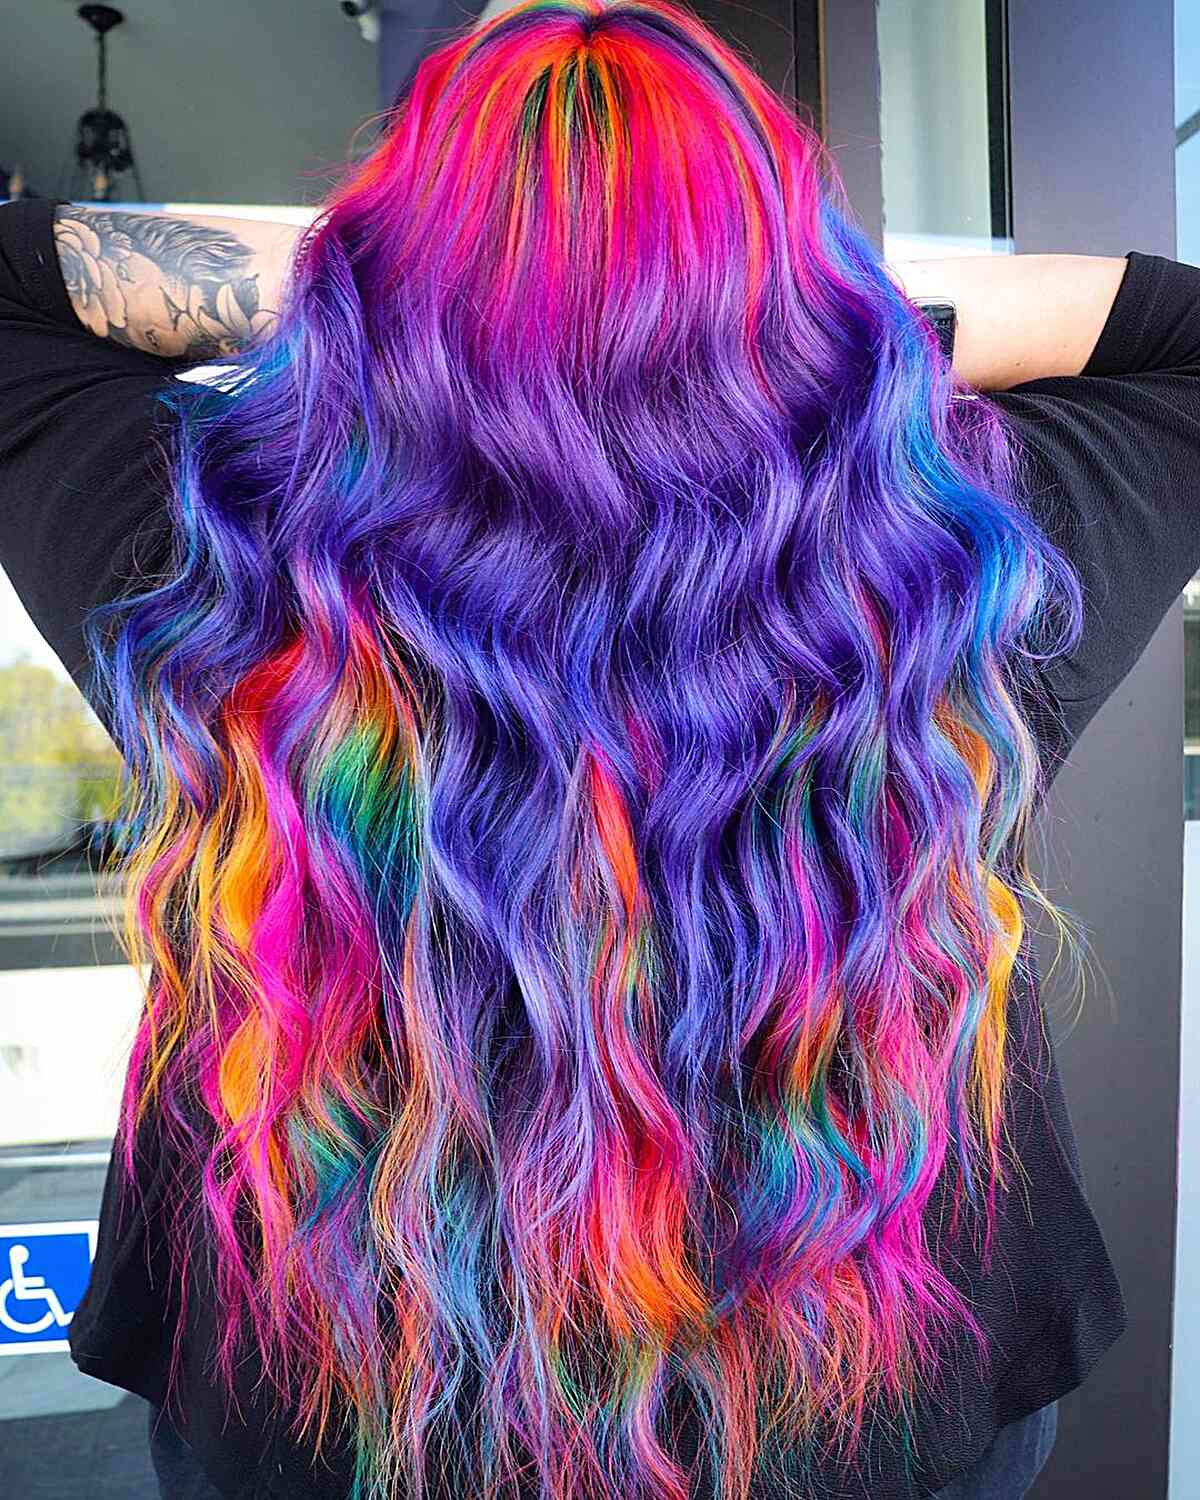 Vivid and Vibrant Mix of Rainbow Colored Hair on long wavy tresses